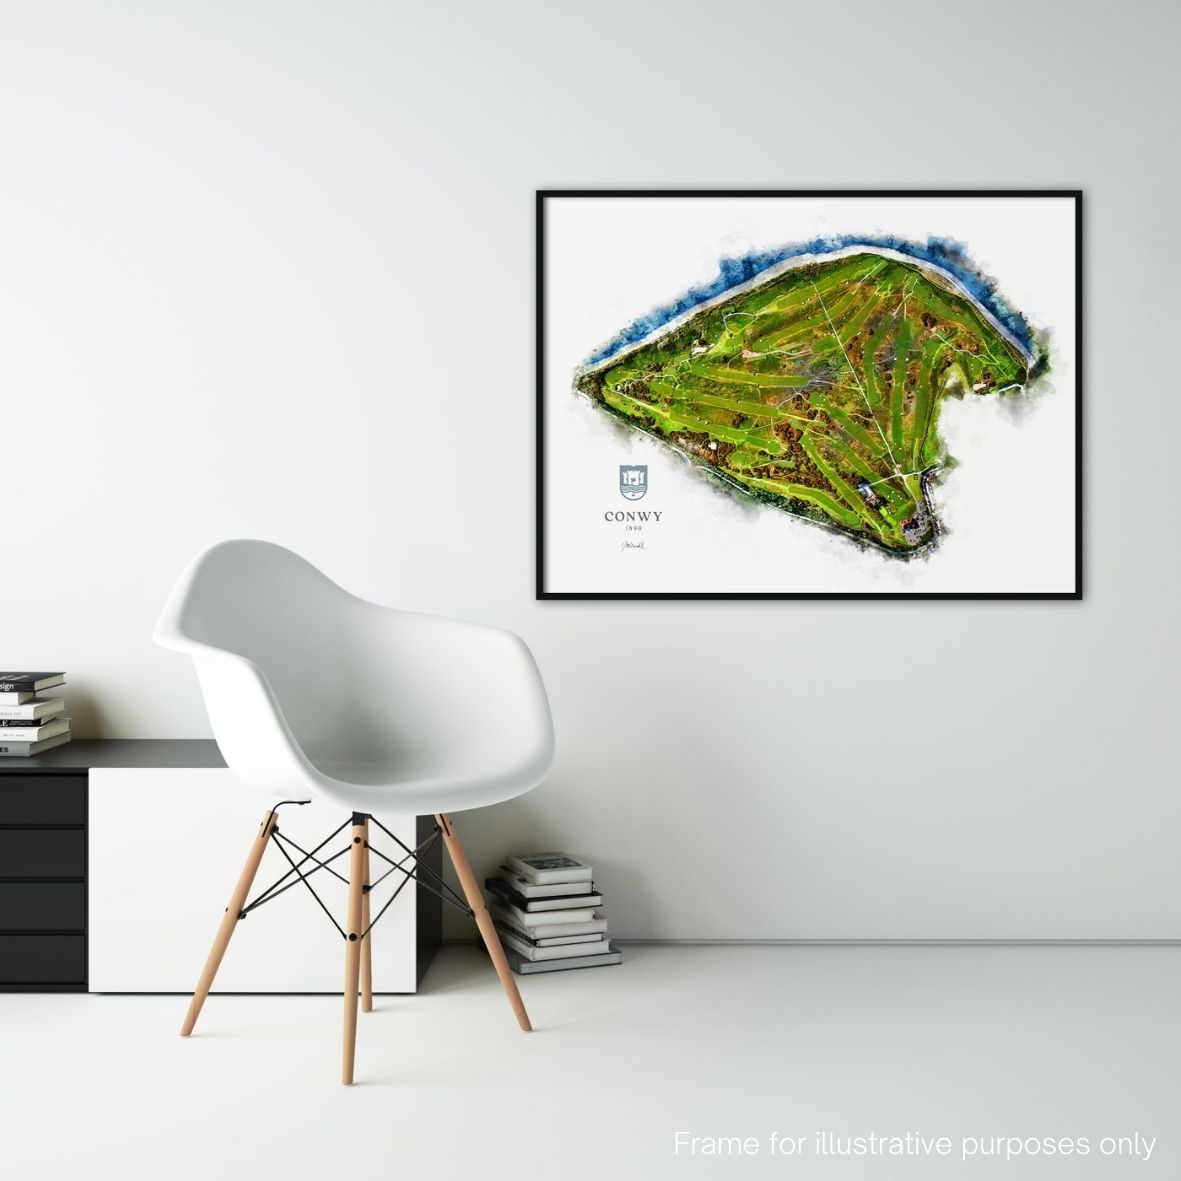 Large Conwy Golf Club Print on Wall by Joe McDonnell